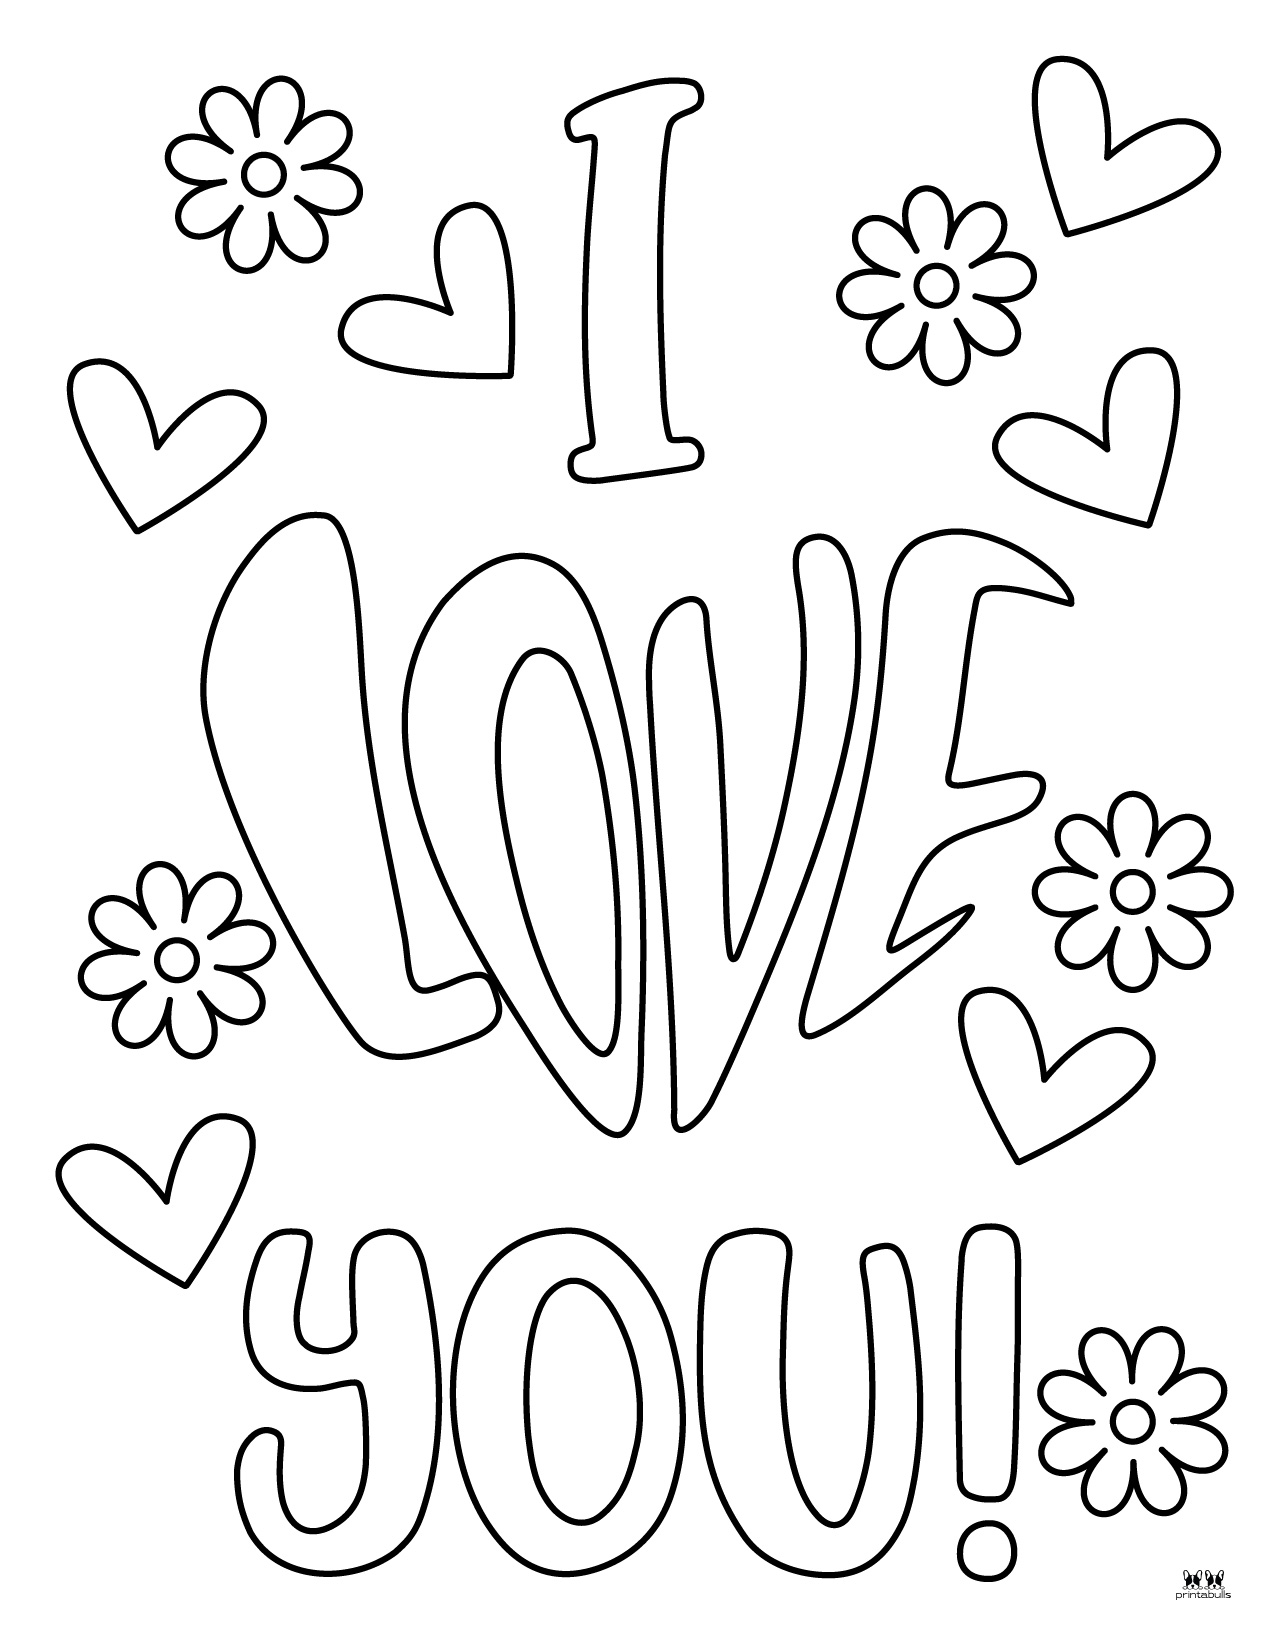 Heart Coloring Pages - 25 FREE Pages | Printabulls